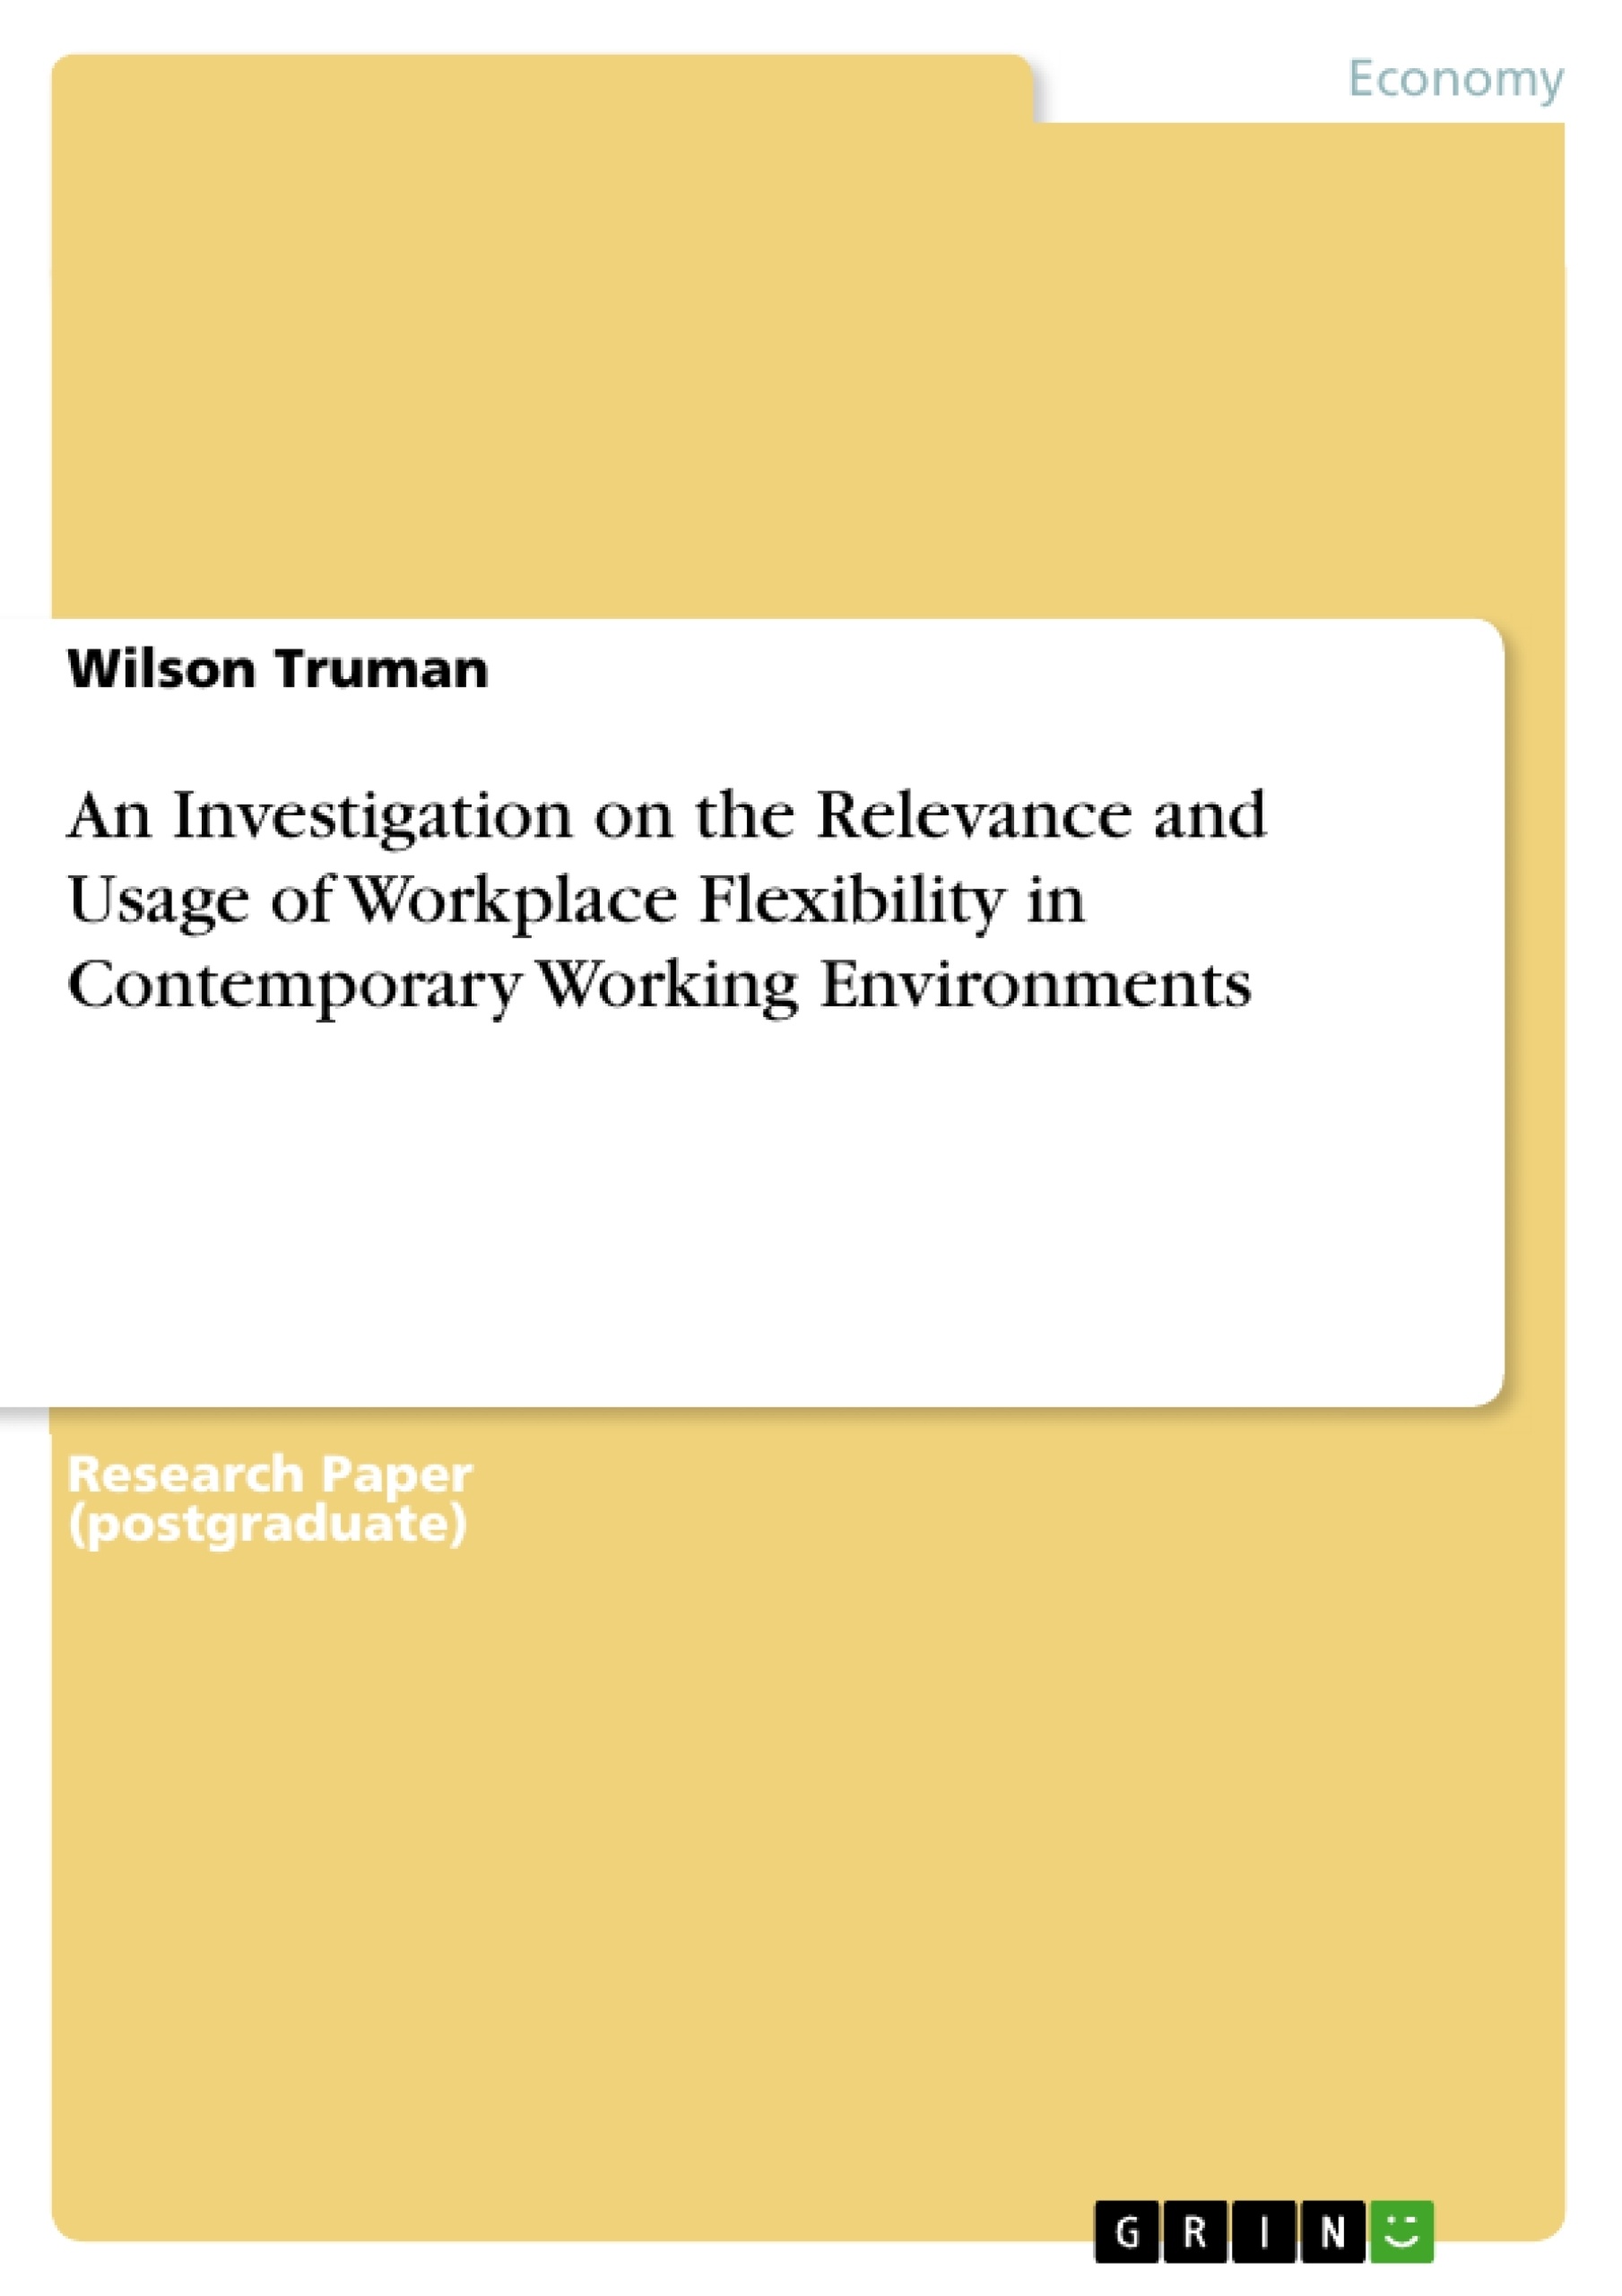 Título: An Investigation on the Relevance and Usage of Workplace Flexibility in Contemporary Working Environments